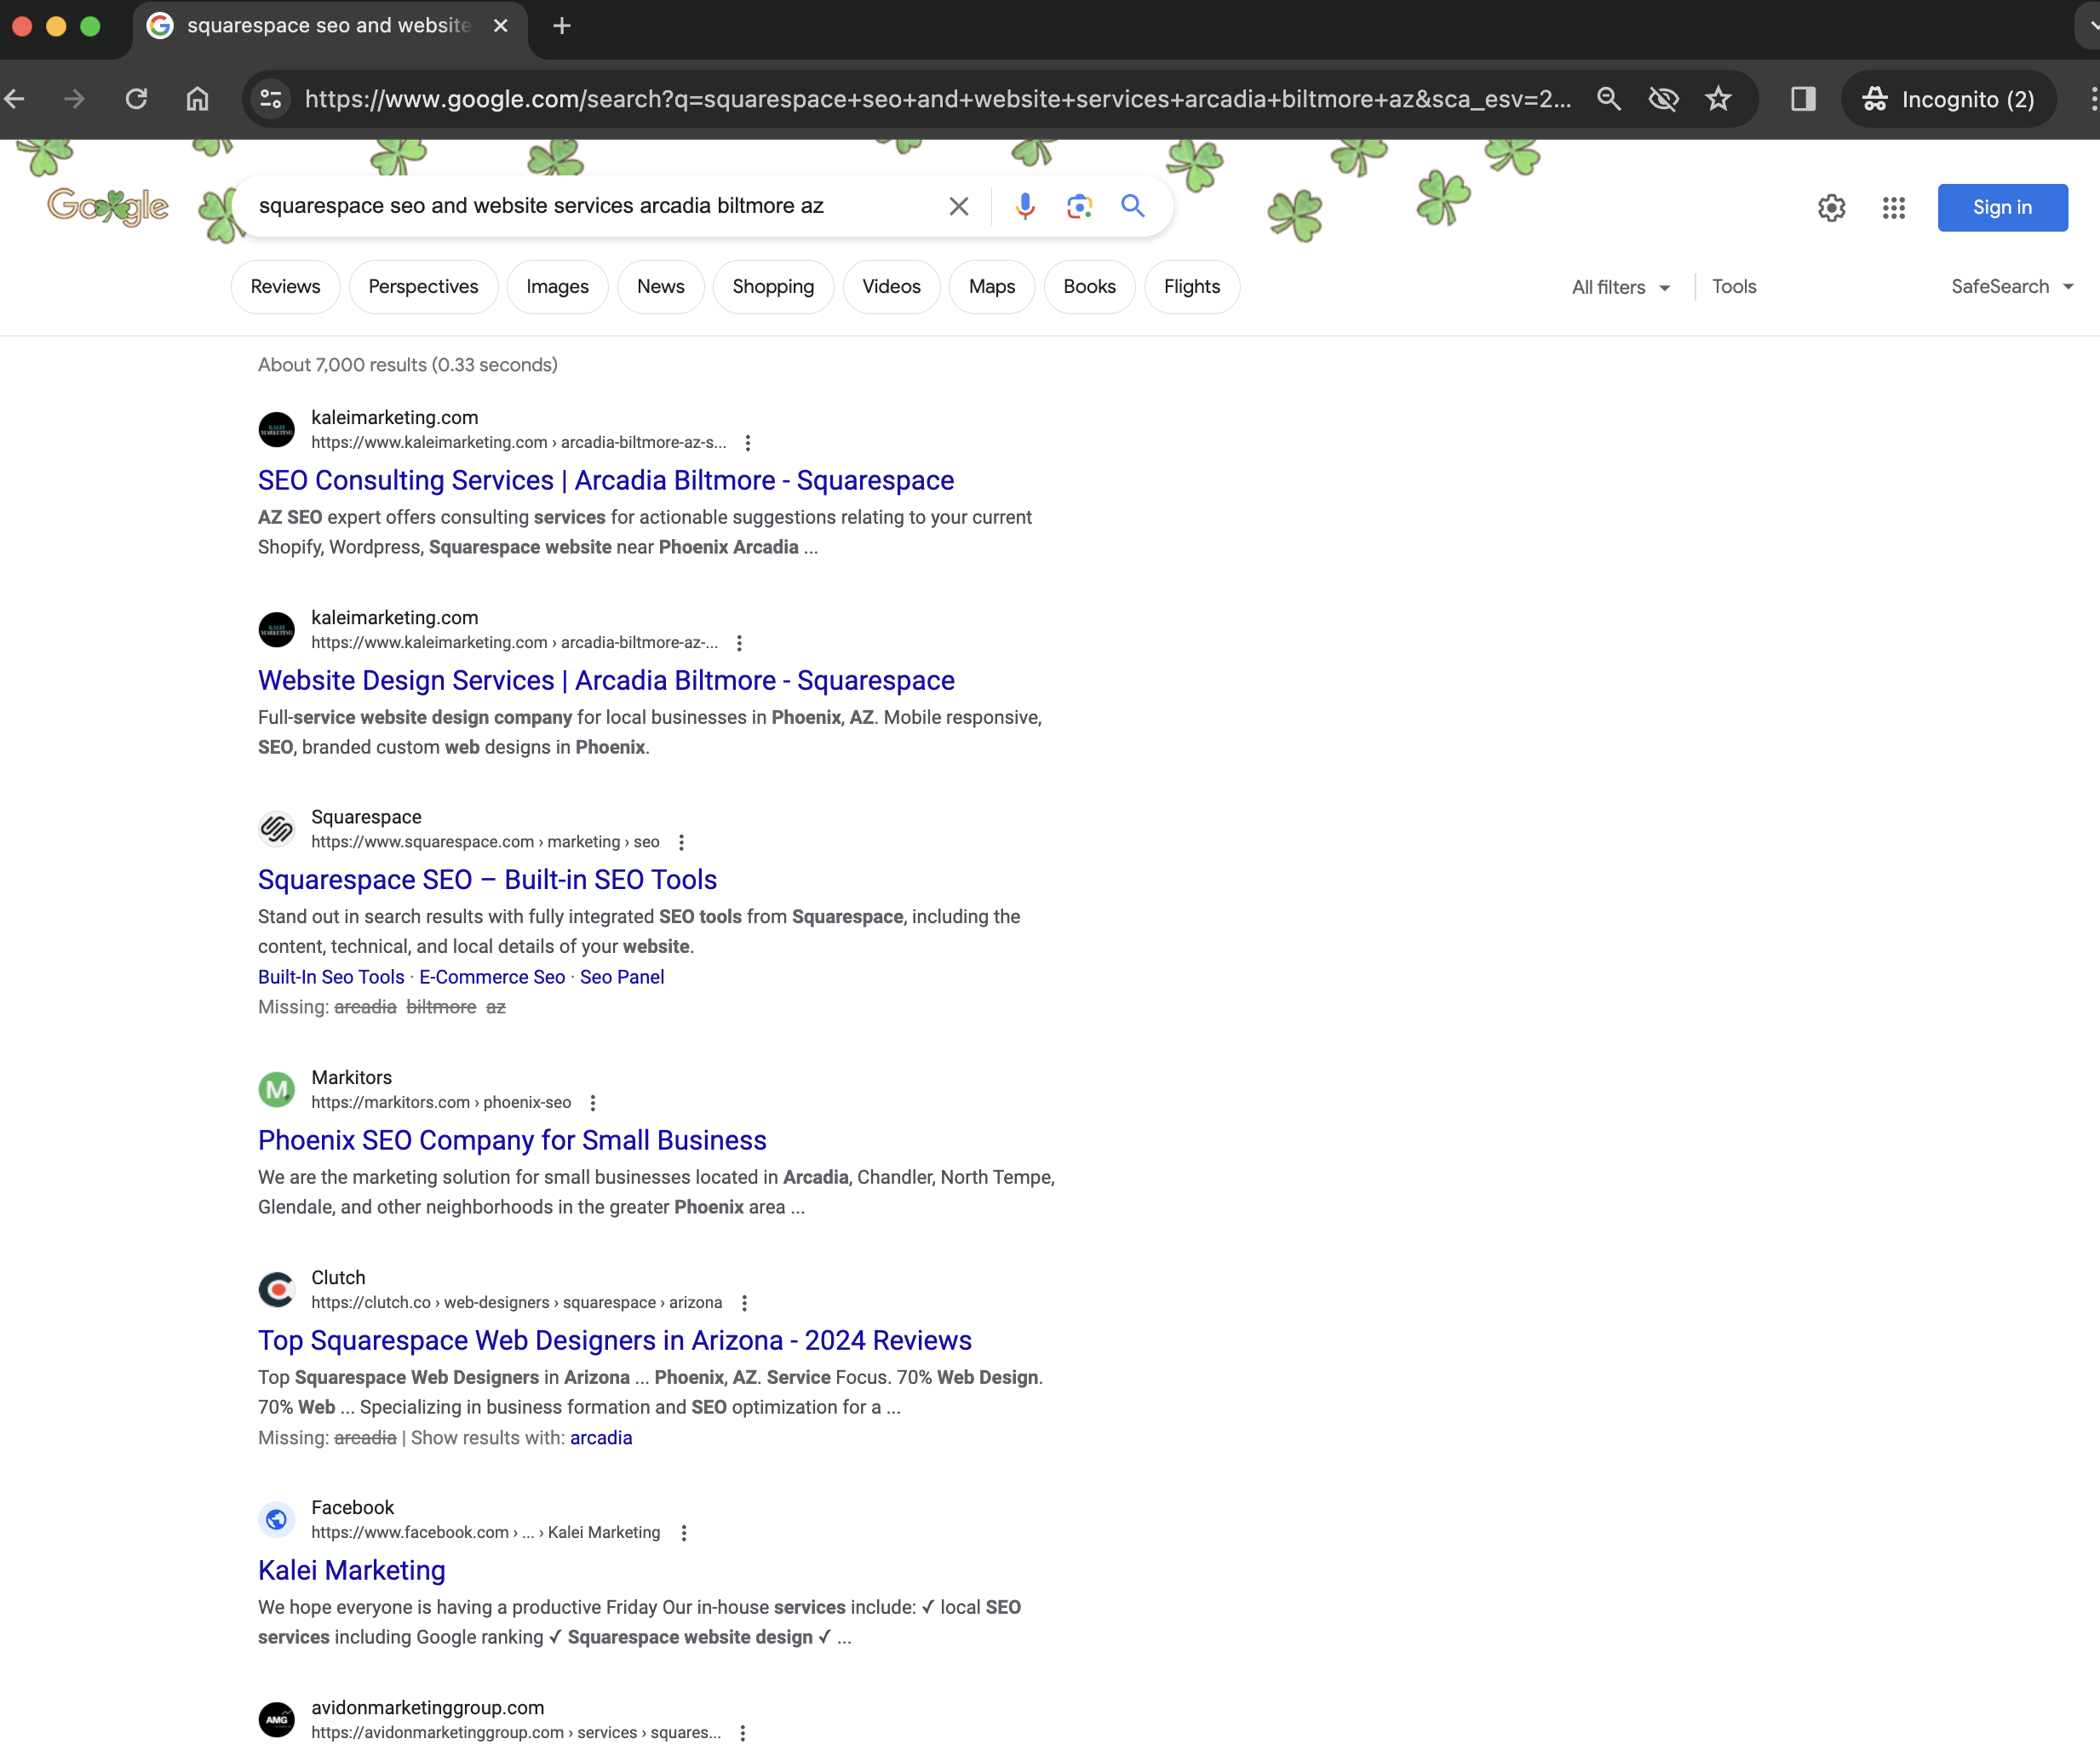 squarespace seo and website services arcadia biltmore az, Google SEO Results, Kalei Marketing.png